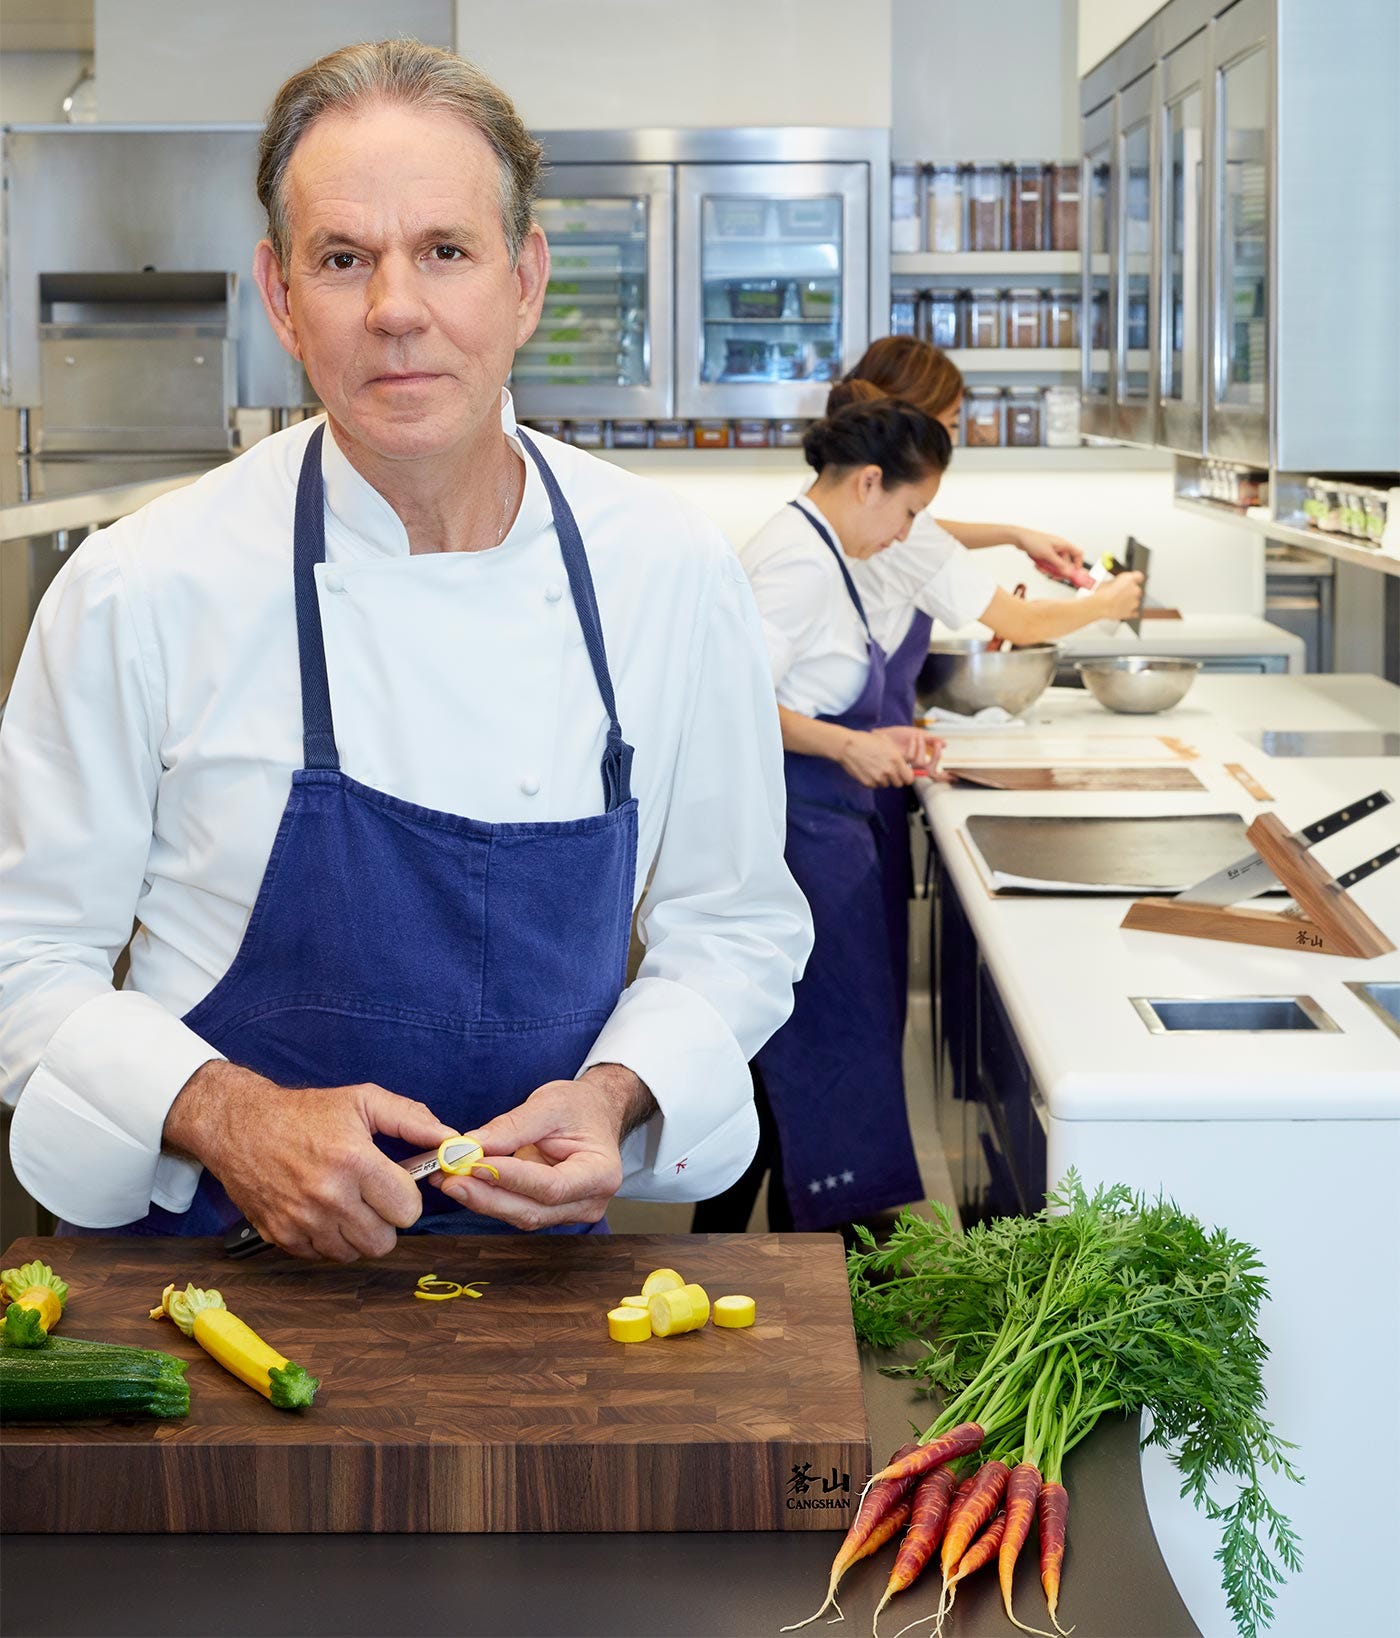 Thomas Keller Signature Collection by Cangshan -White Series 3